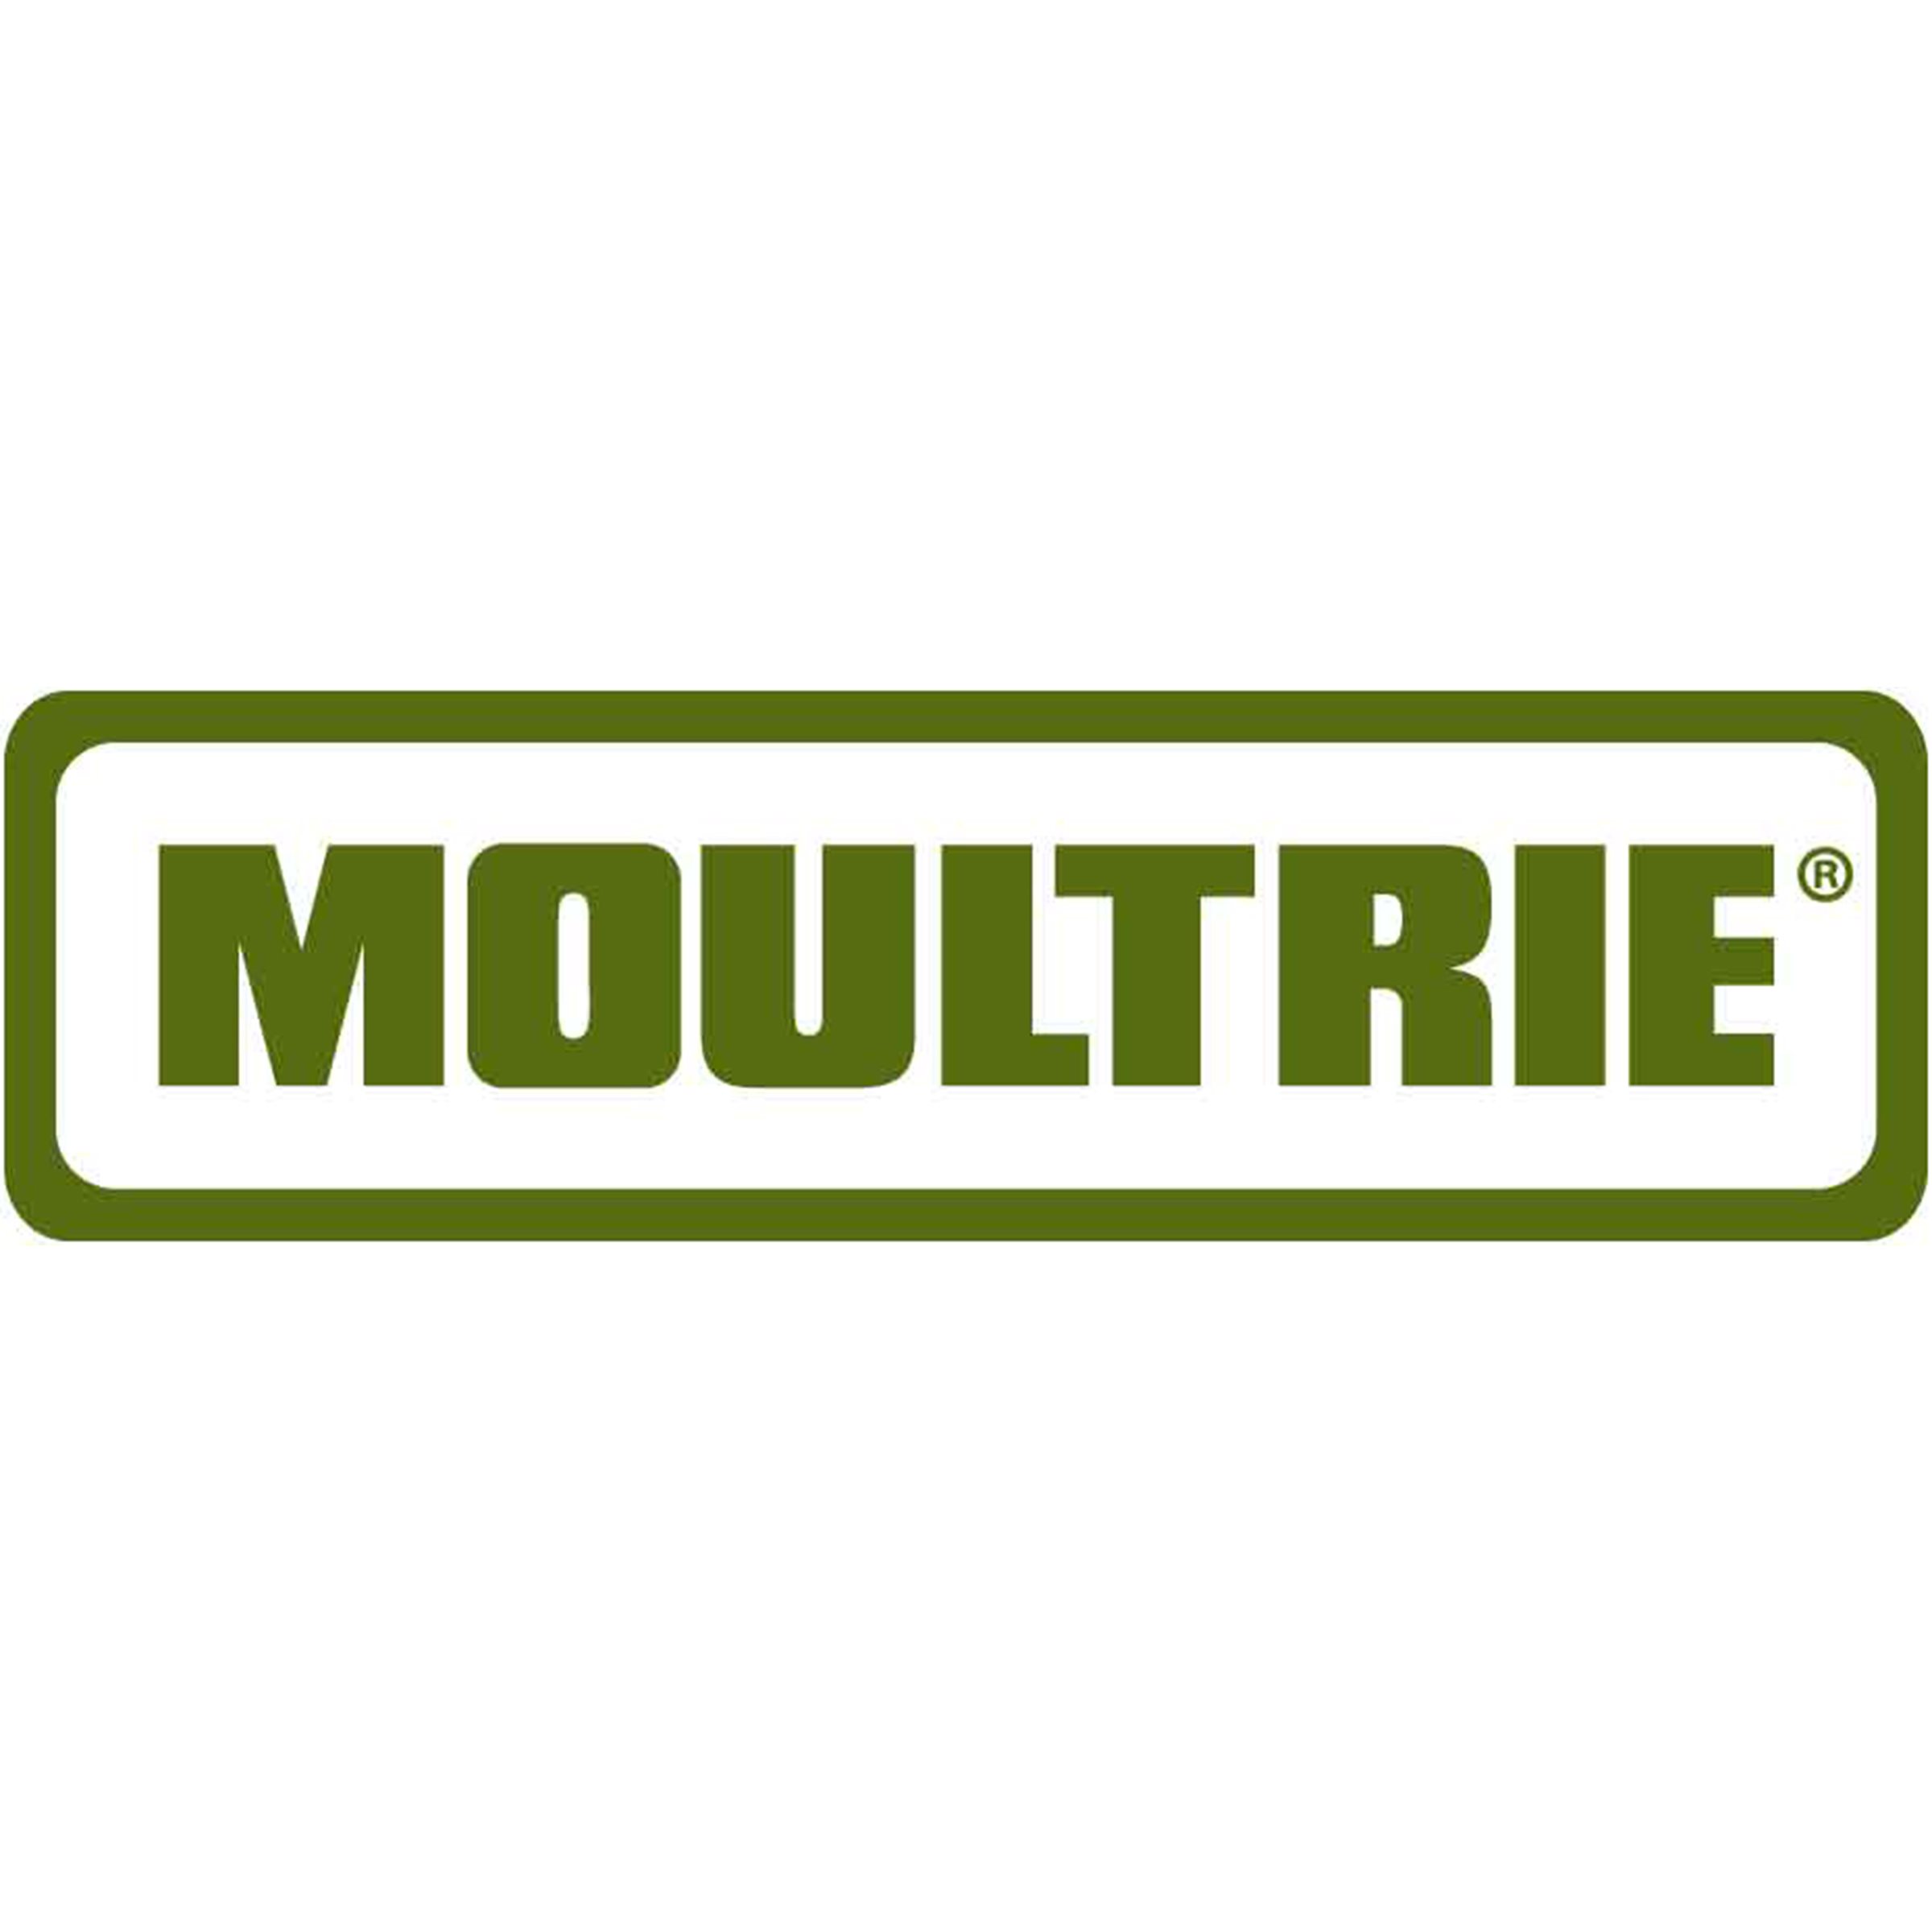 A_Moultrie